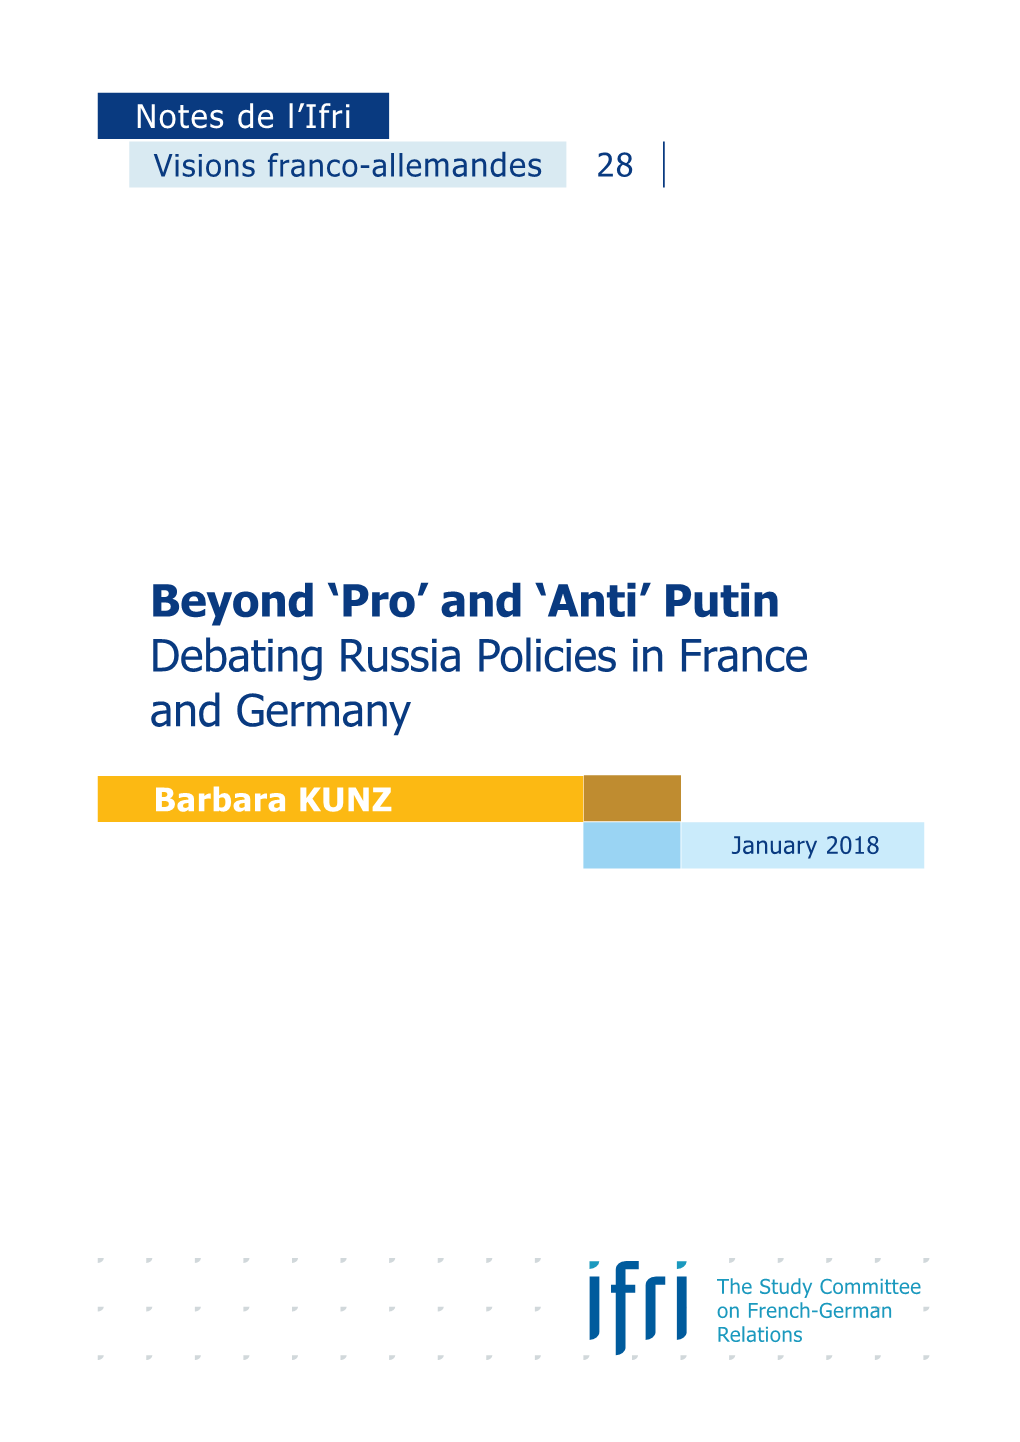 Beyond "Pro" and "Anti Putin: Debating Russia Policies in France